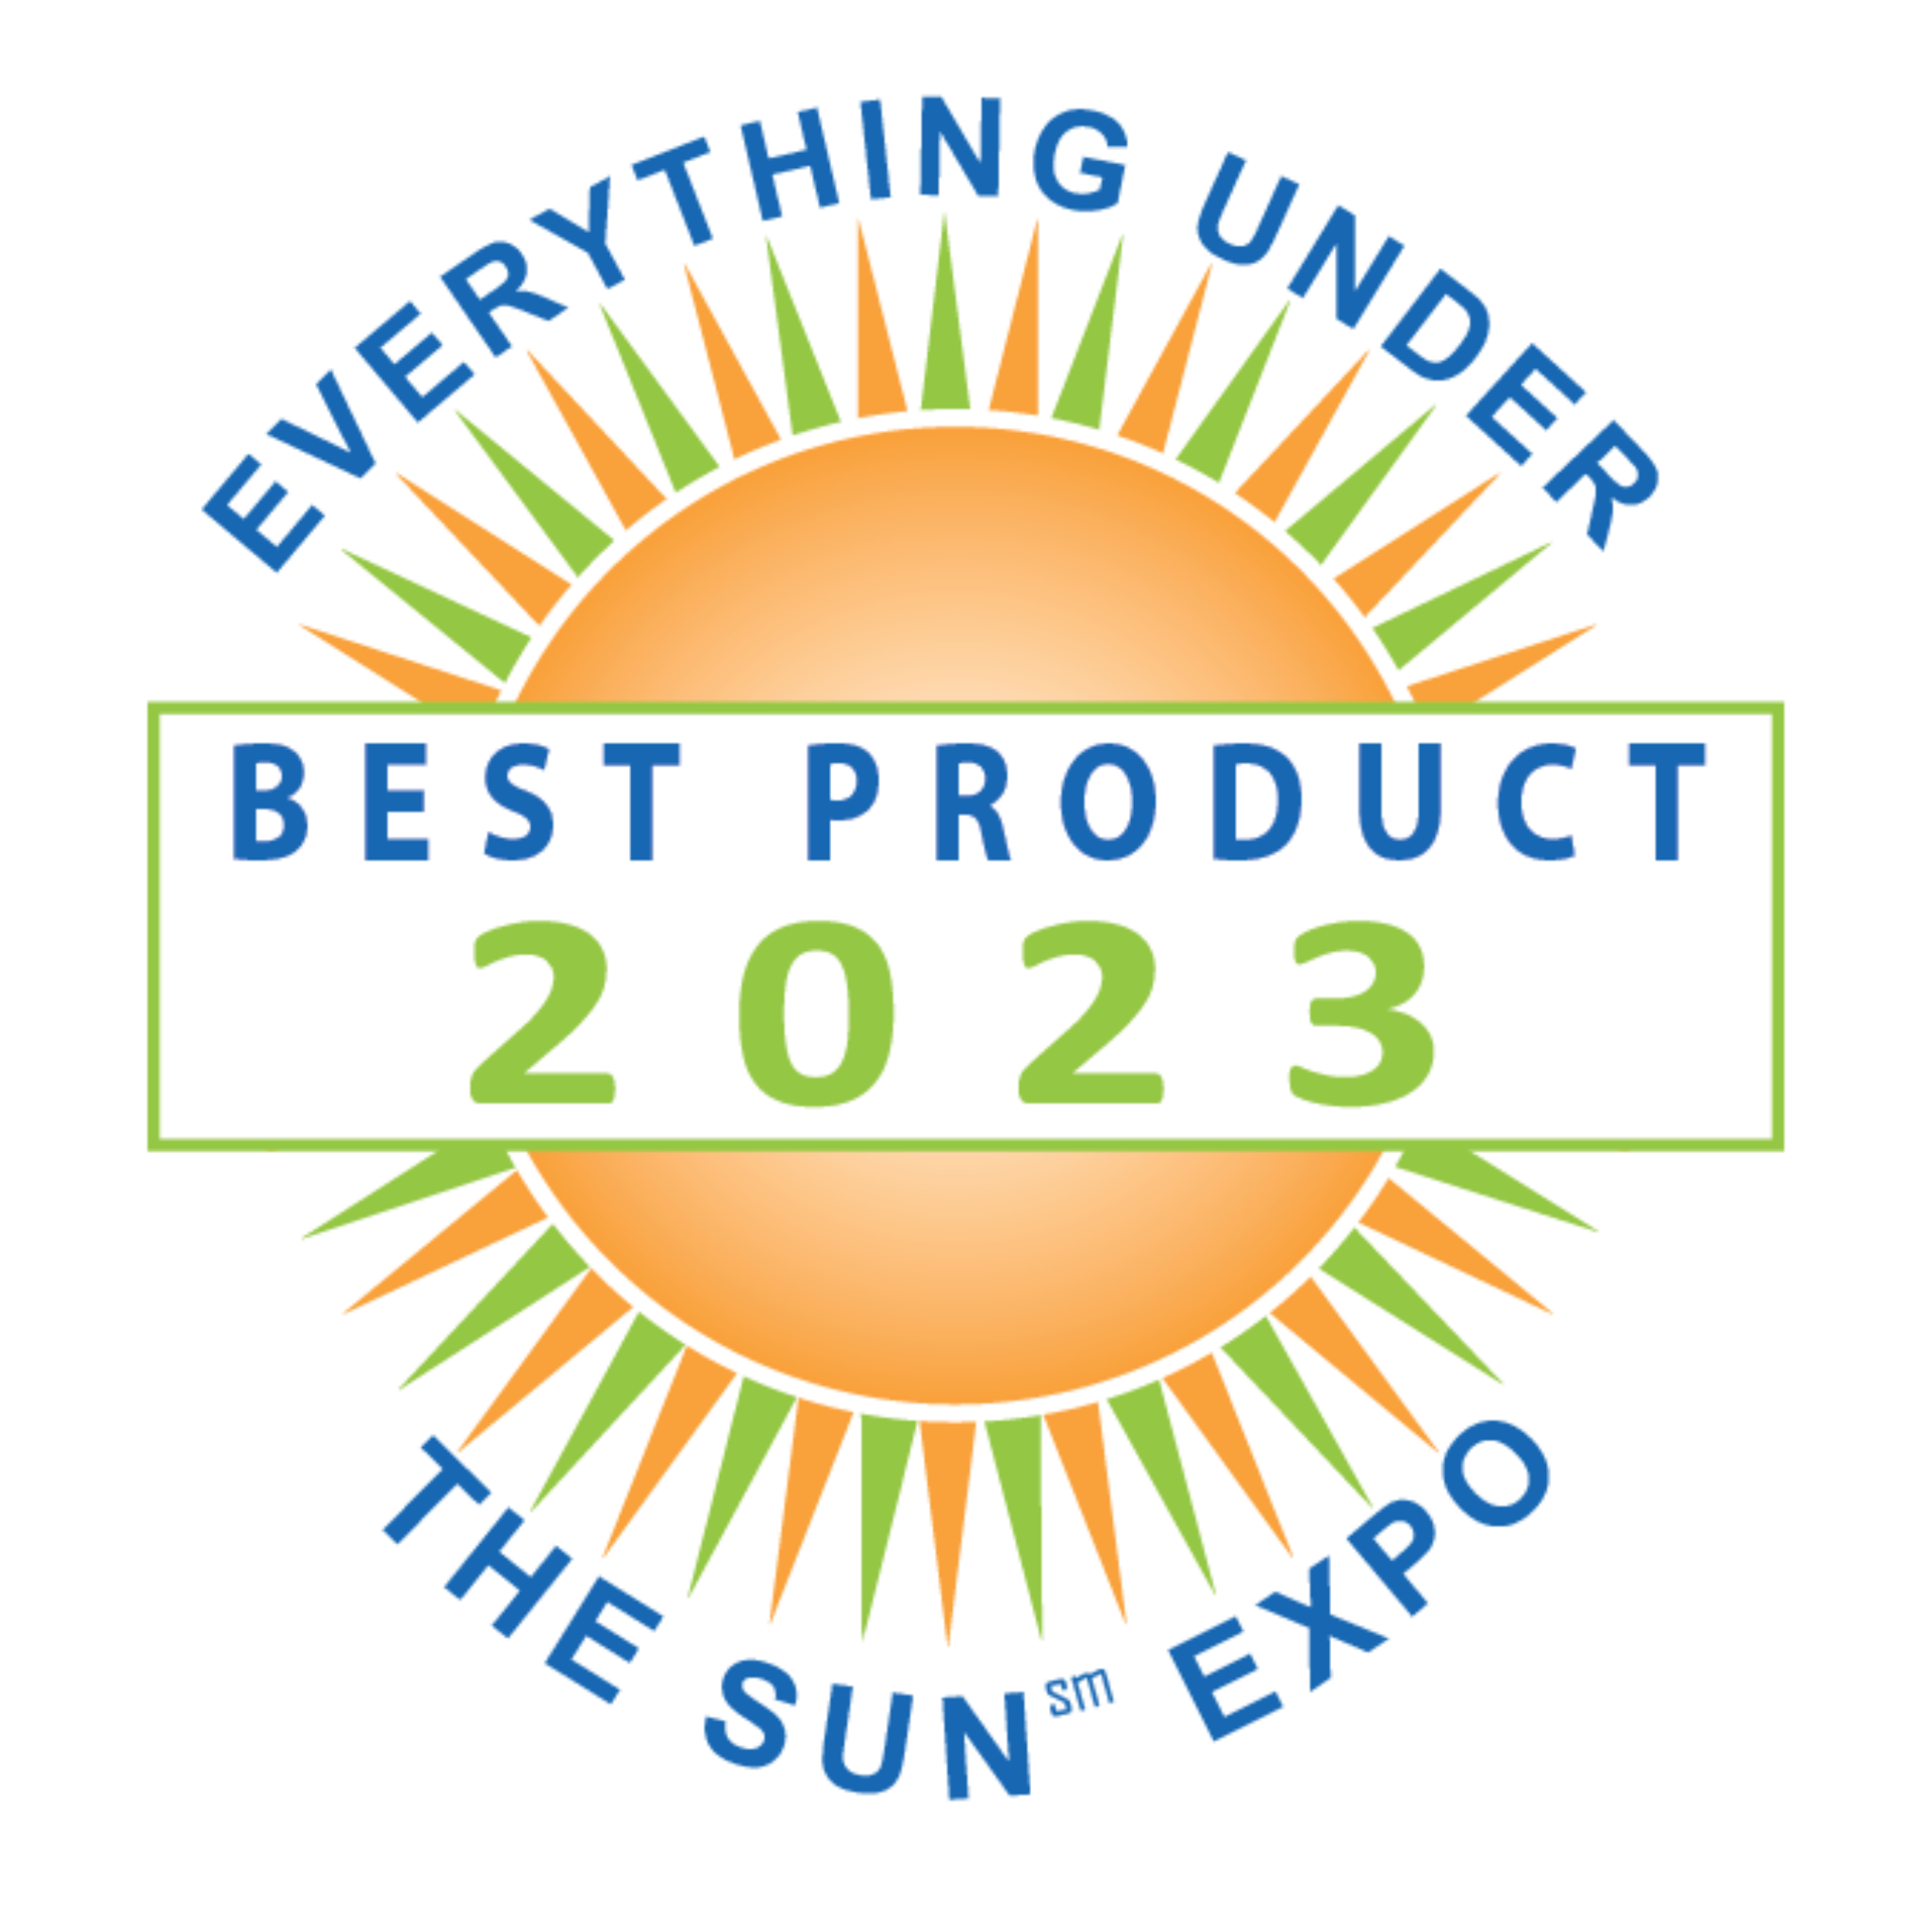 Everything Under The Sun - Best Product 2023 | The Cyclone Filter Cleaner